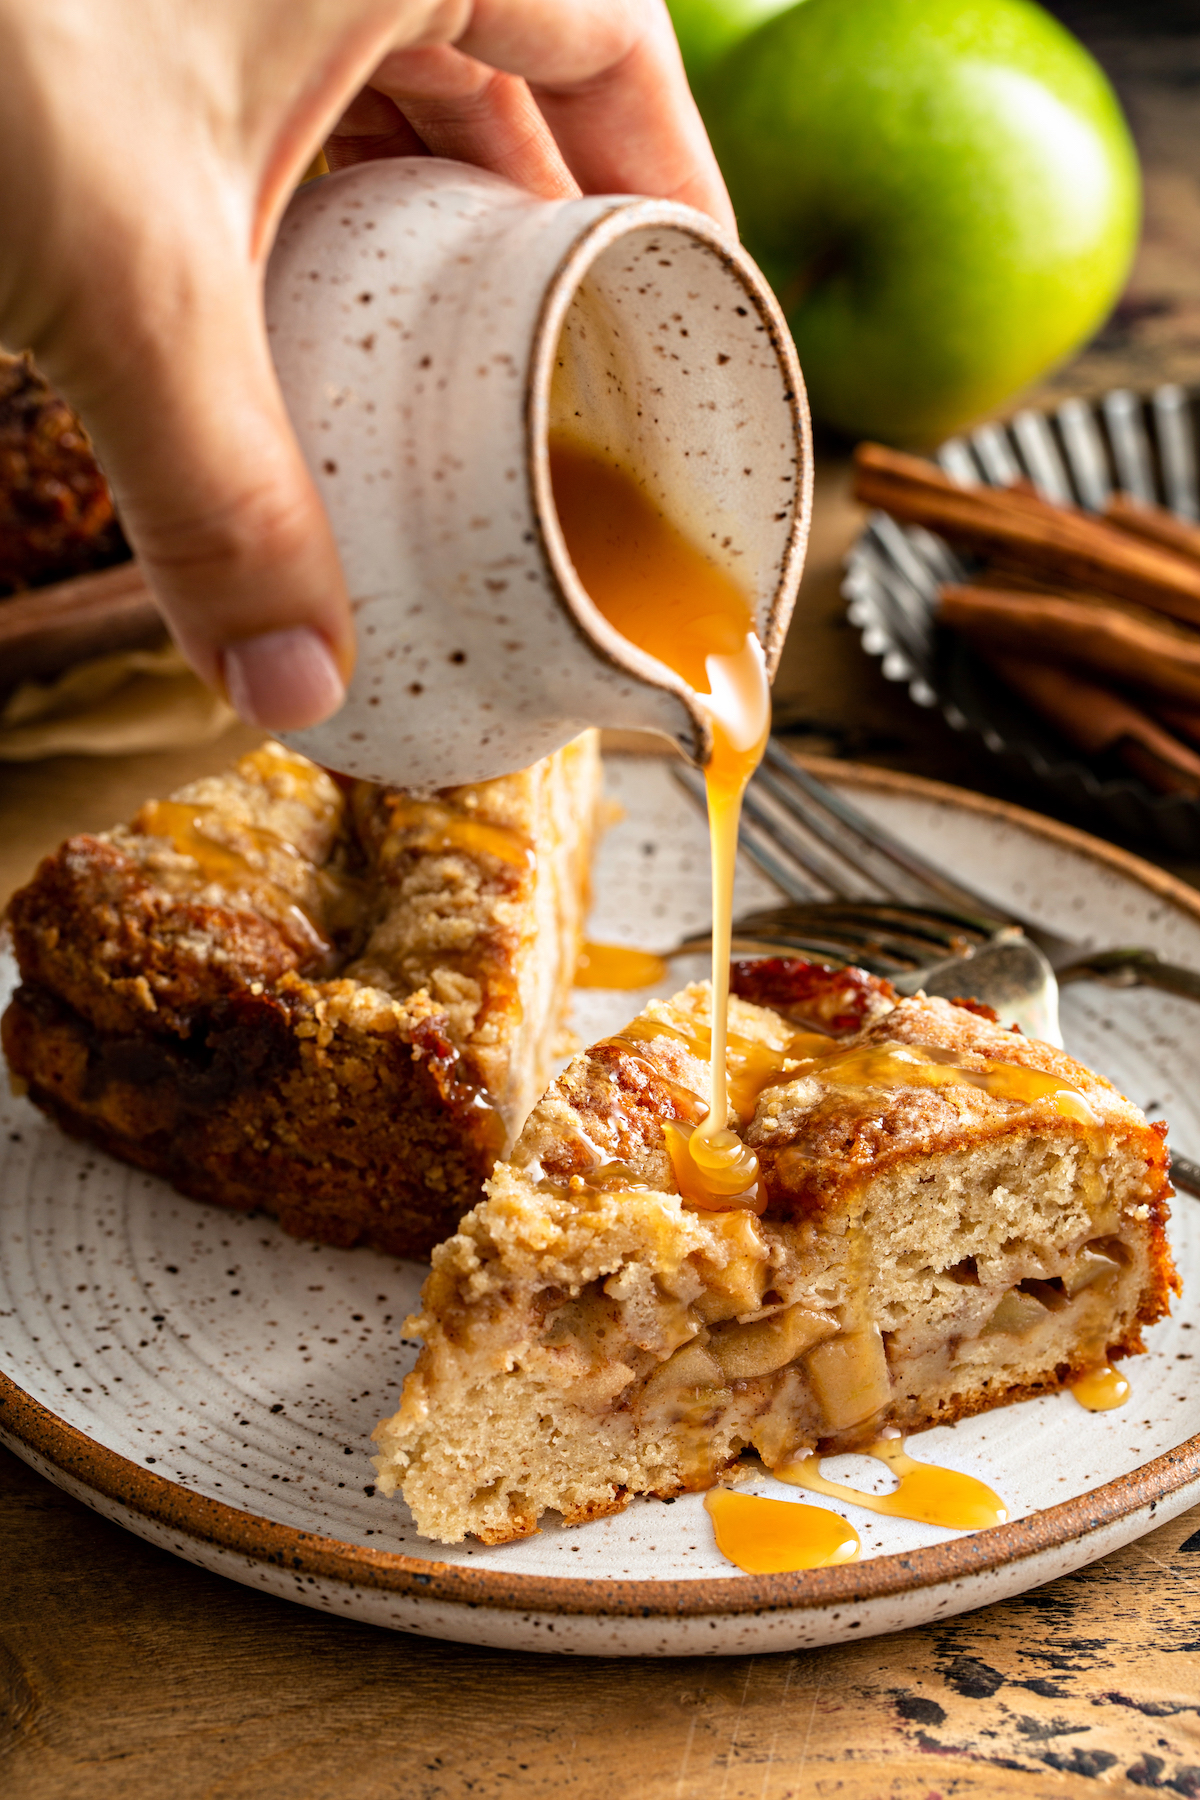 Two slices of Apple Streusel Cake on a white plate with caramel sauce being drizzled on top of one slice of cake.